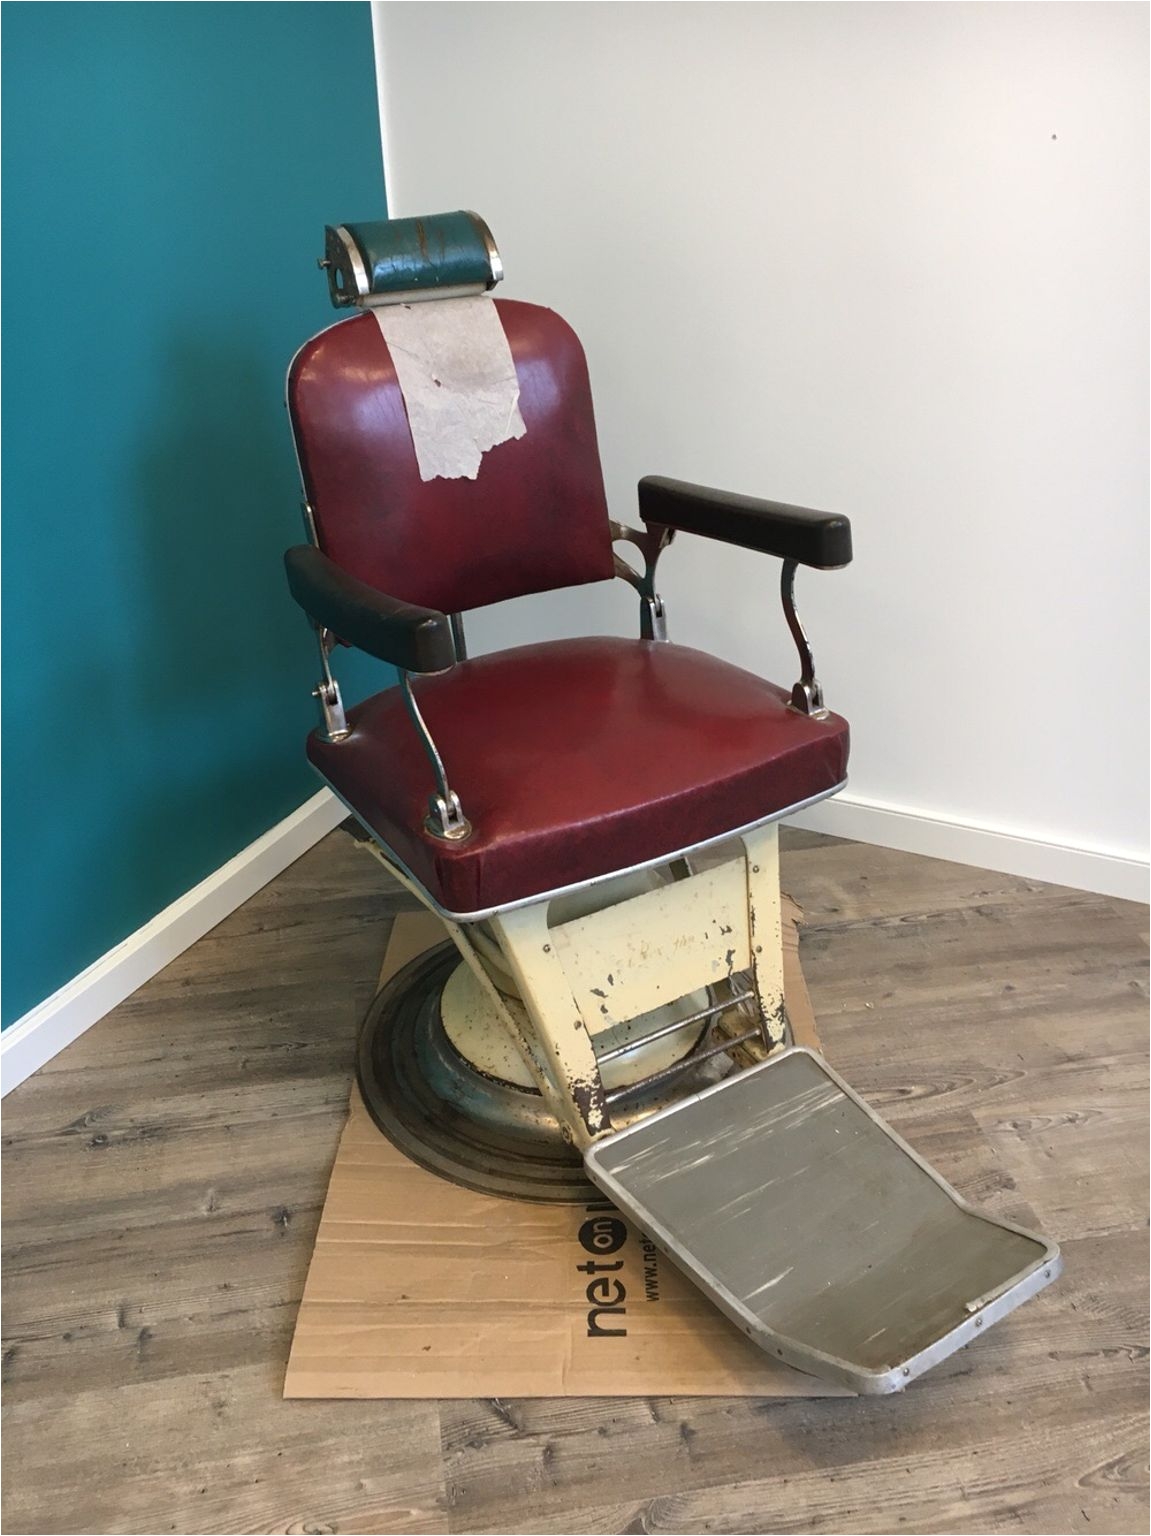 Barber Shop Chairs for Sale Used Unique Barbershop Chair D Discover More Vintage Treasure In the